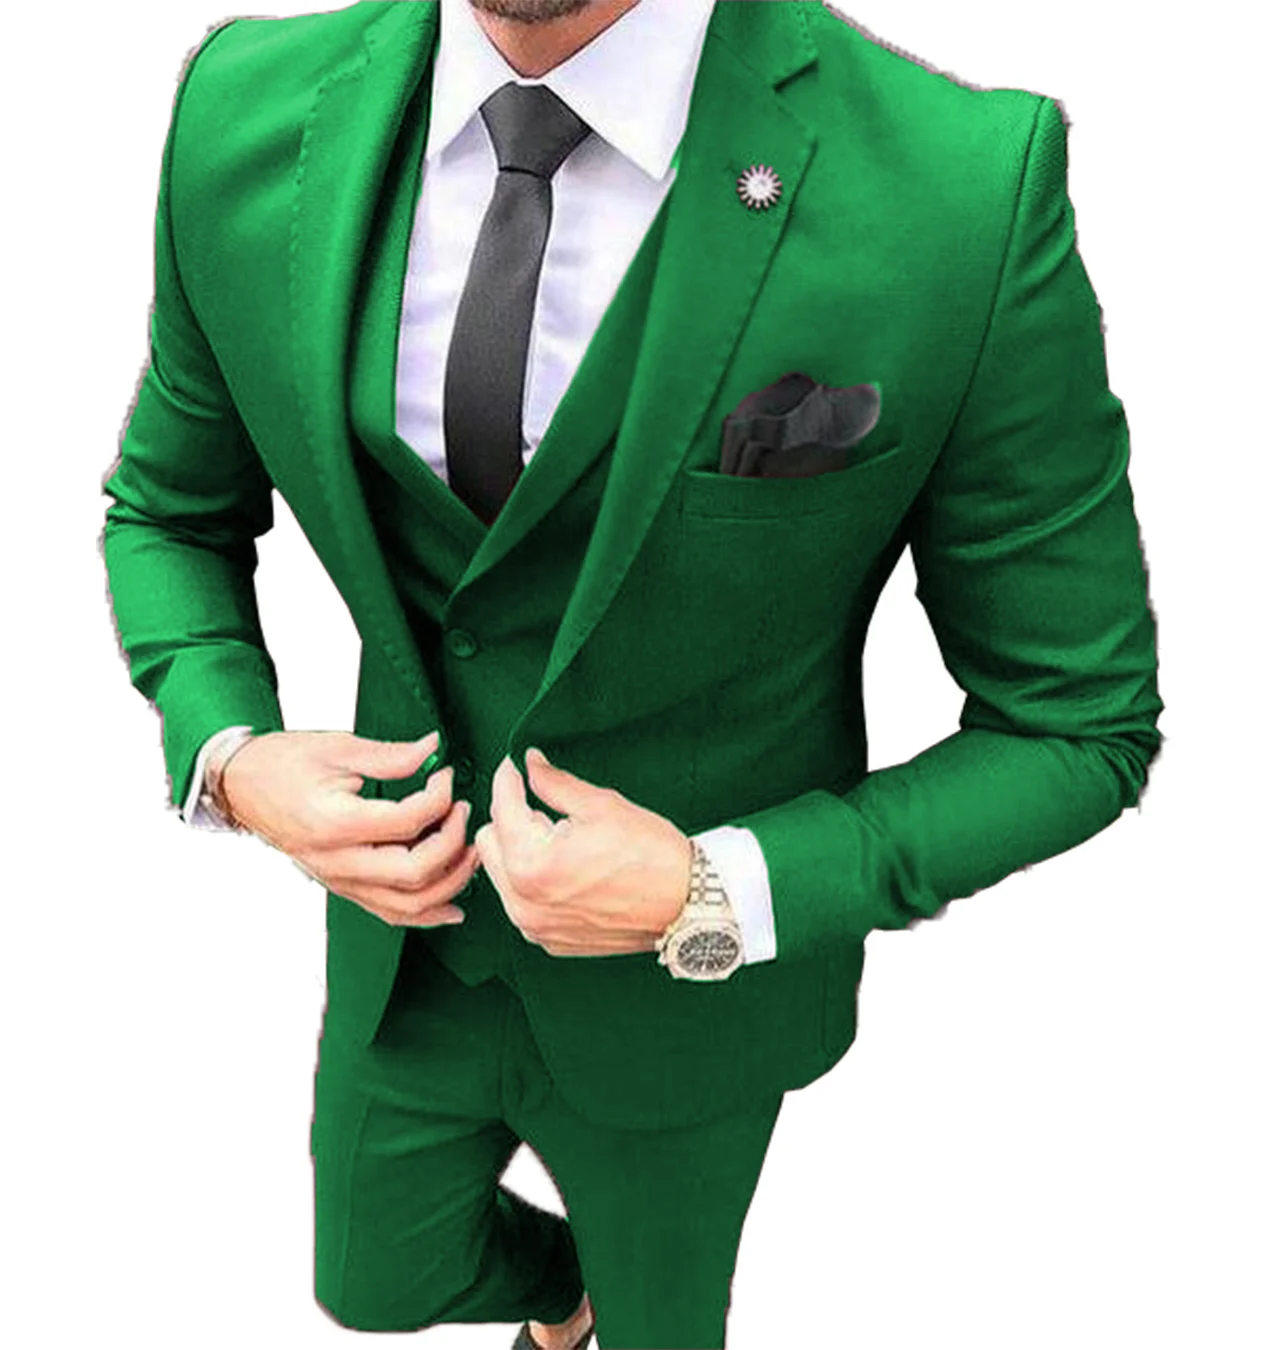 Men's Green Business Suits 3 Pieces Regular Fit Notch Lapel Prom Burgundy Whiite Tuxedos For Wedding Groom (Blazer+Vest+Pants)